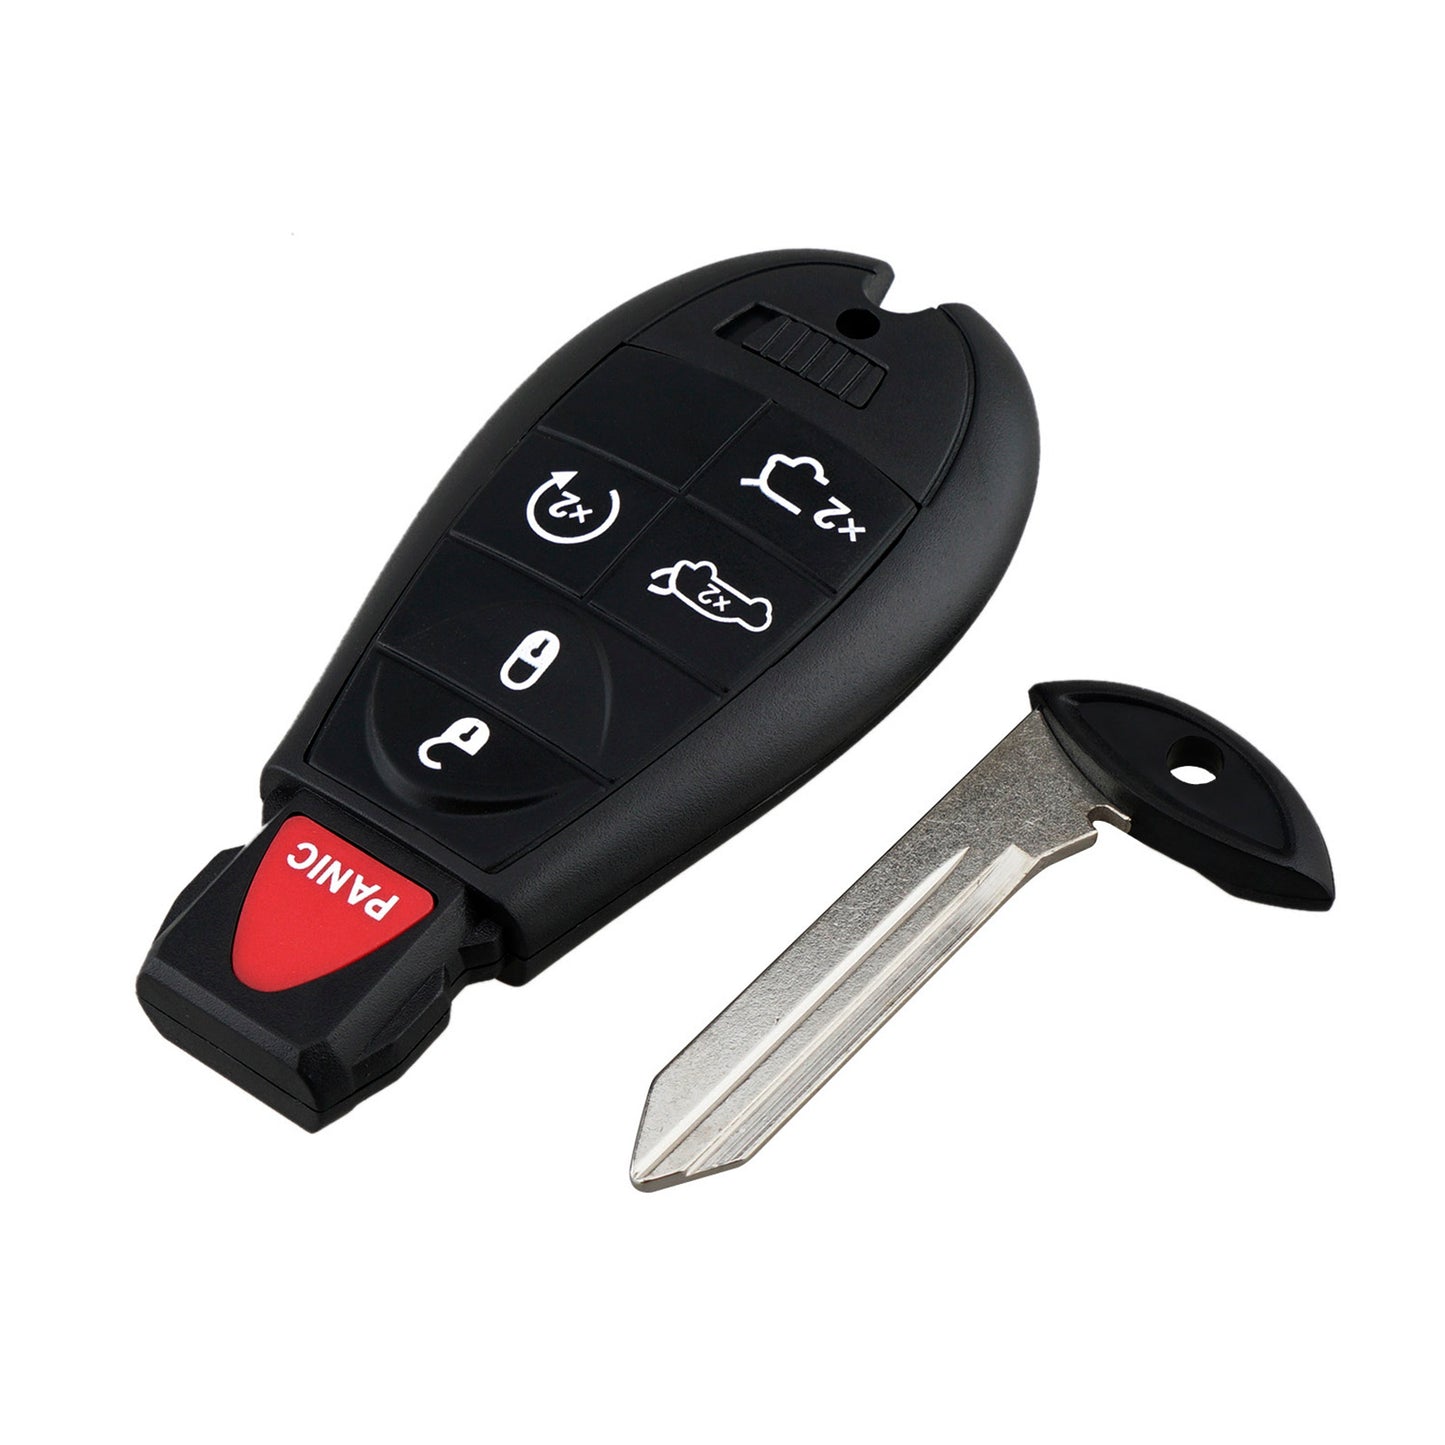 5+1 Buttons 433MHz Keyless Entry Fob Remote Car Key For 2008 - 2013 Jeep Grand Cherokee (Non-Prox)  Commander FCC ID: M3N5WY783X IYZ-C01CSKU : J421